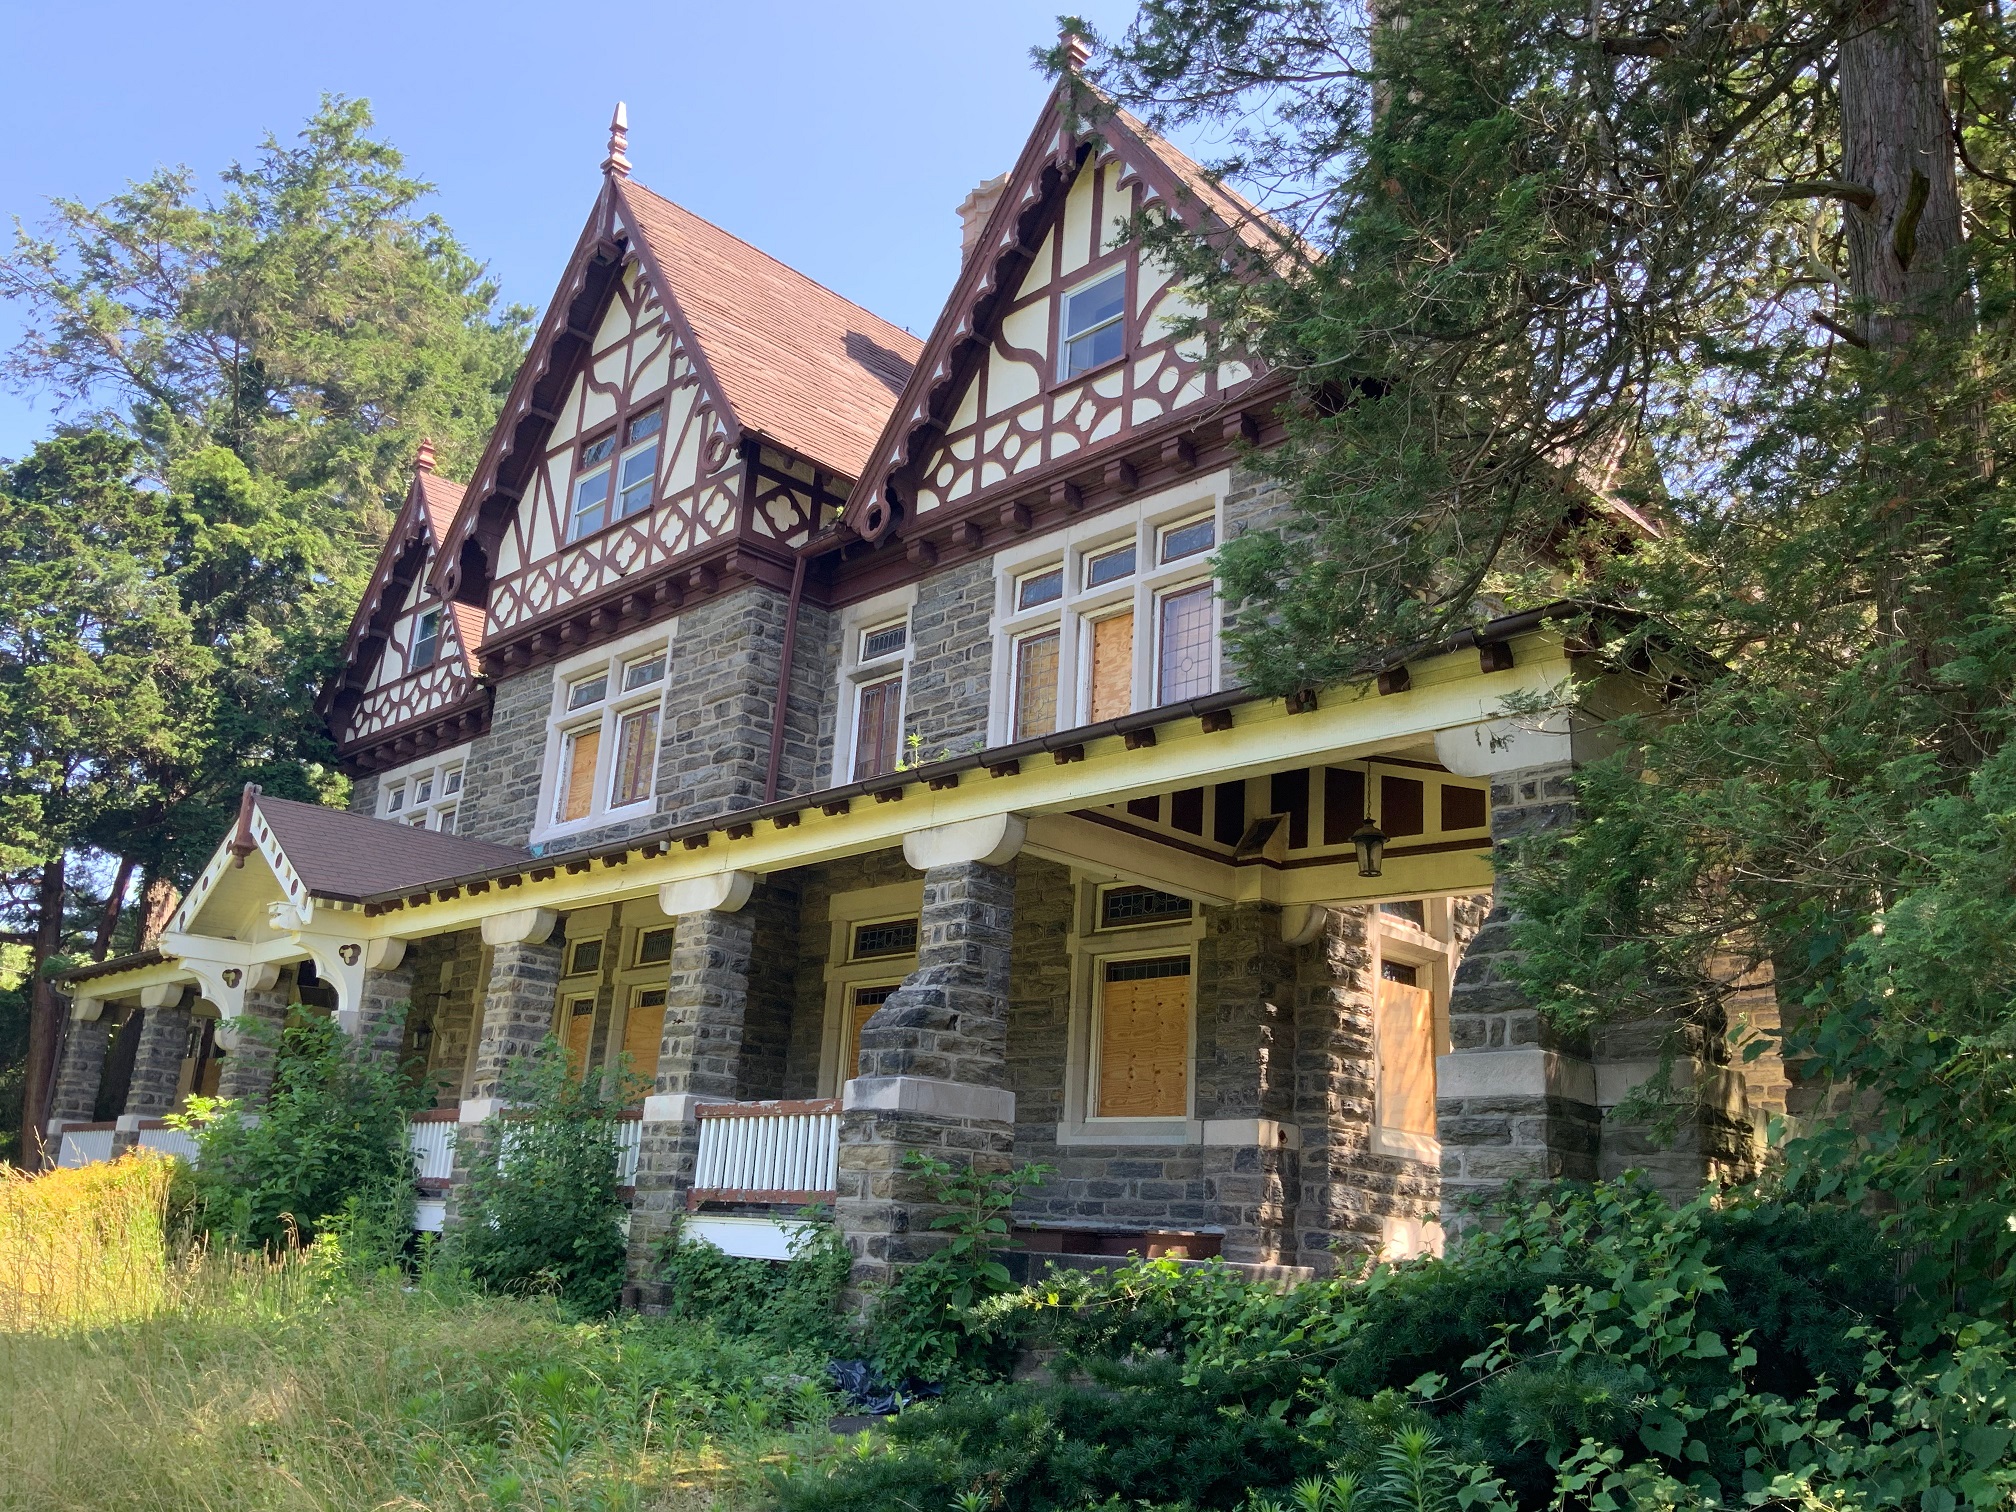 Three story stone and wood house with deep front porch, leaded glass windows, and three peaked roofs along the front.